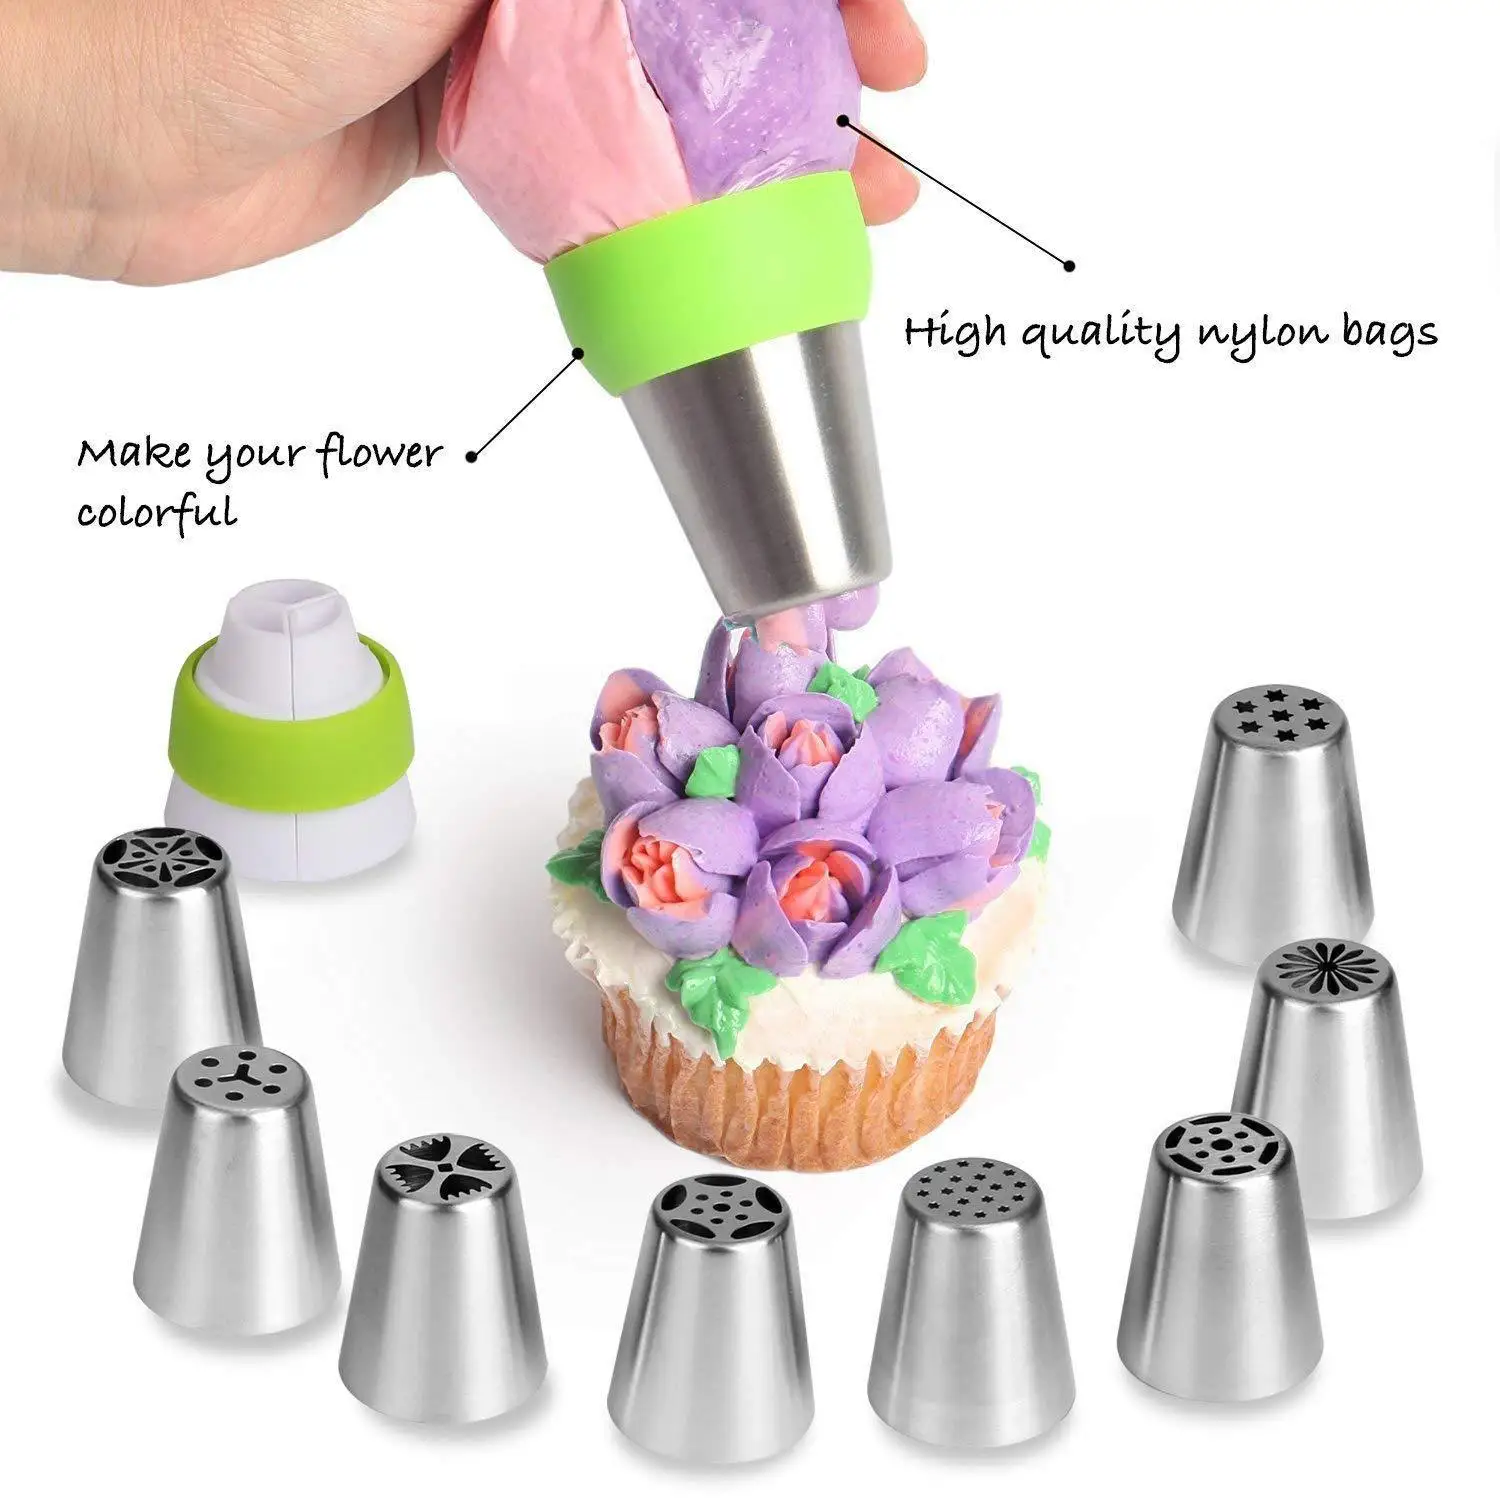 Weetiee 14pc/Set Stainless Steel Russian Tulip Icing Piping Nozzles Fl –  GRILLART U.S. by Weetiee